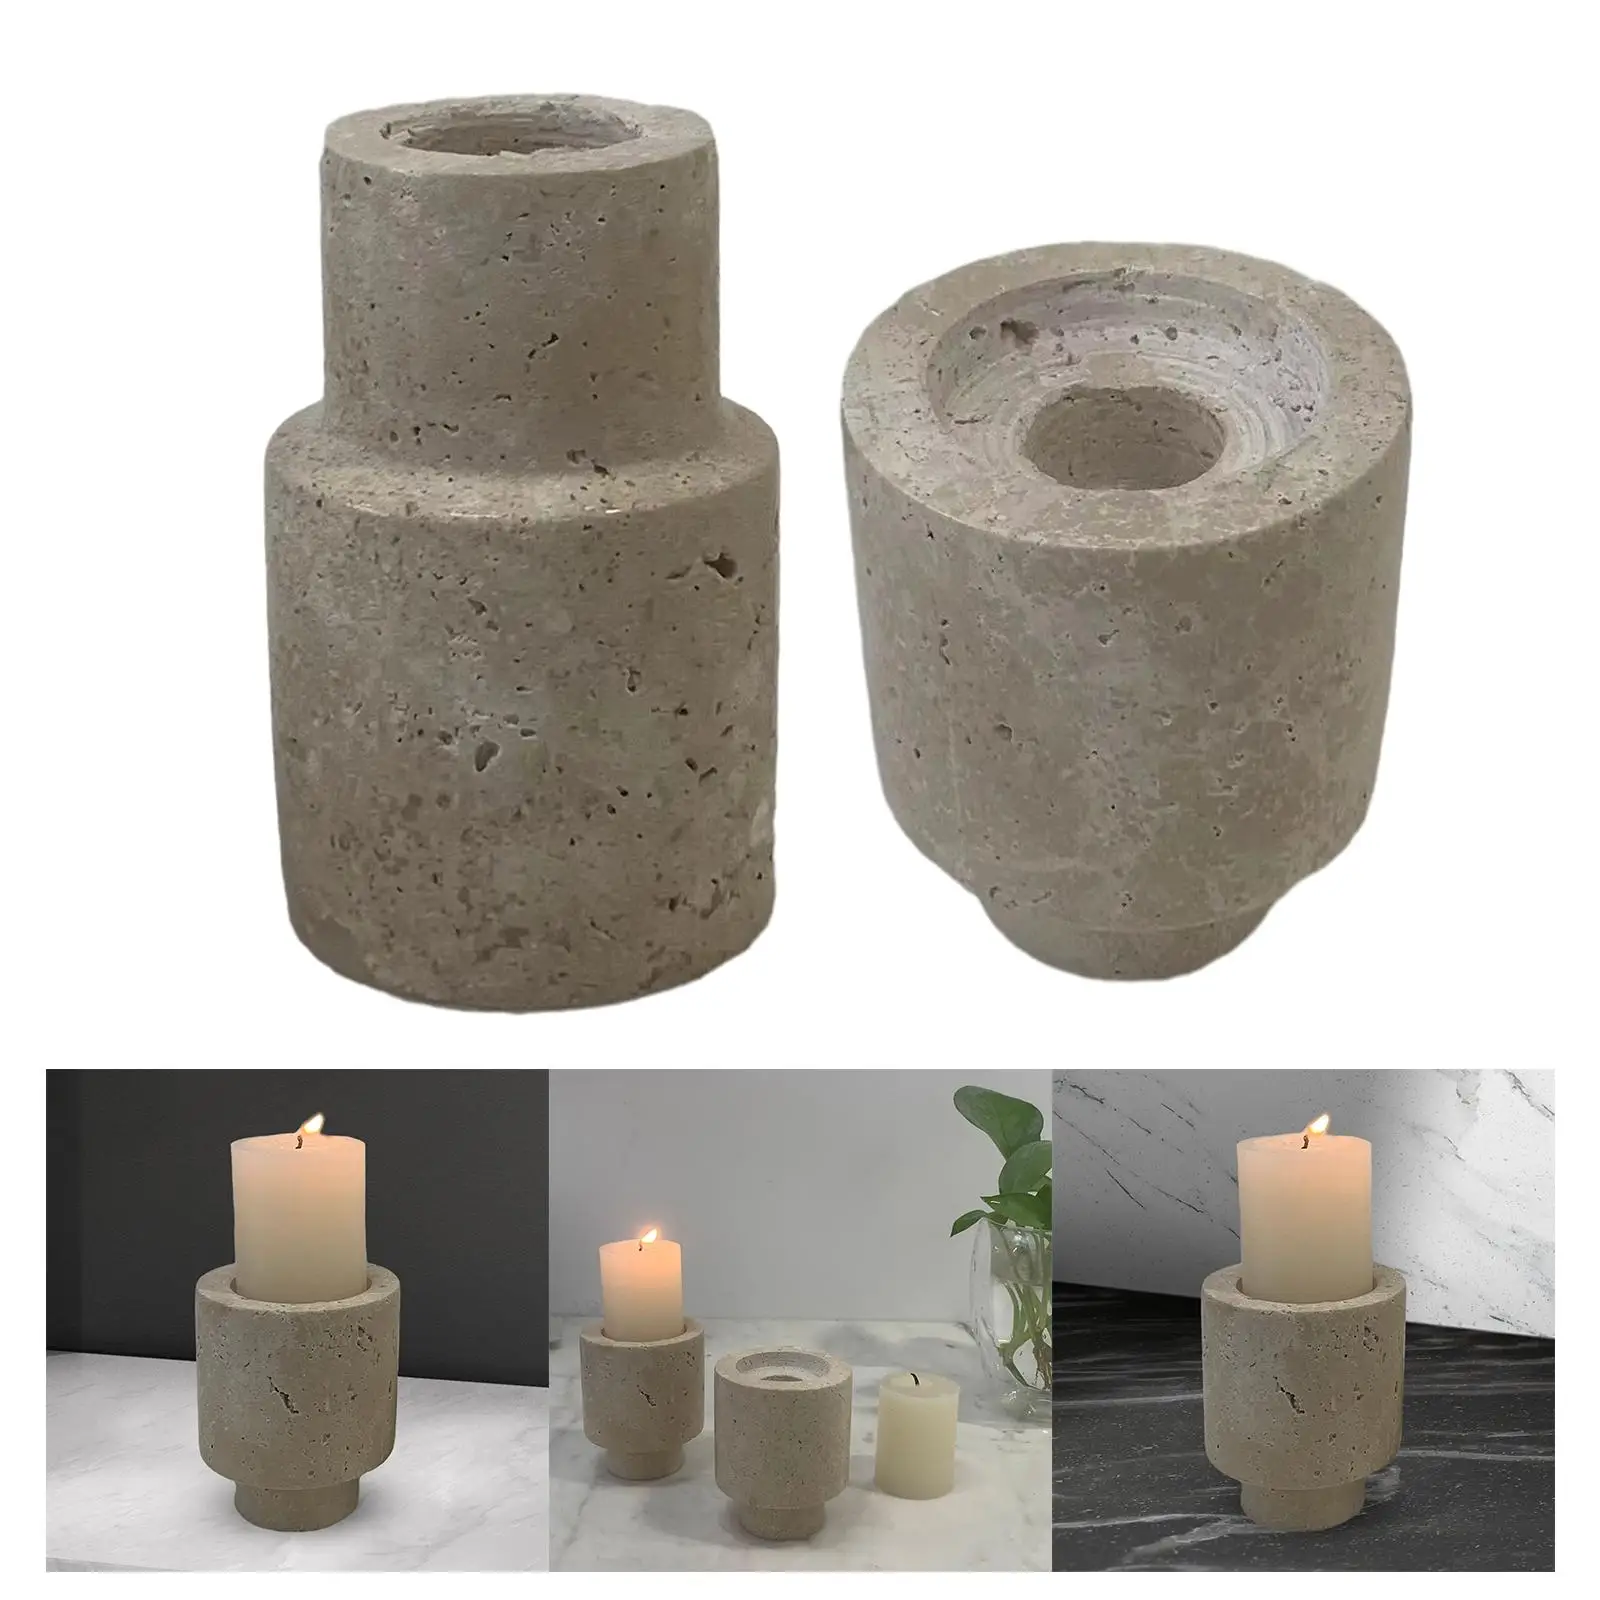 Candlestick Holders Decorative Rustic Marble Candle Holder Candle Holder for Christmas Dining Room Party Anniversary Wedding